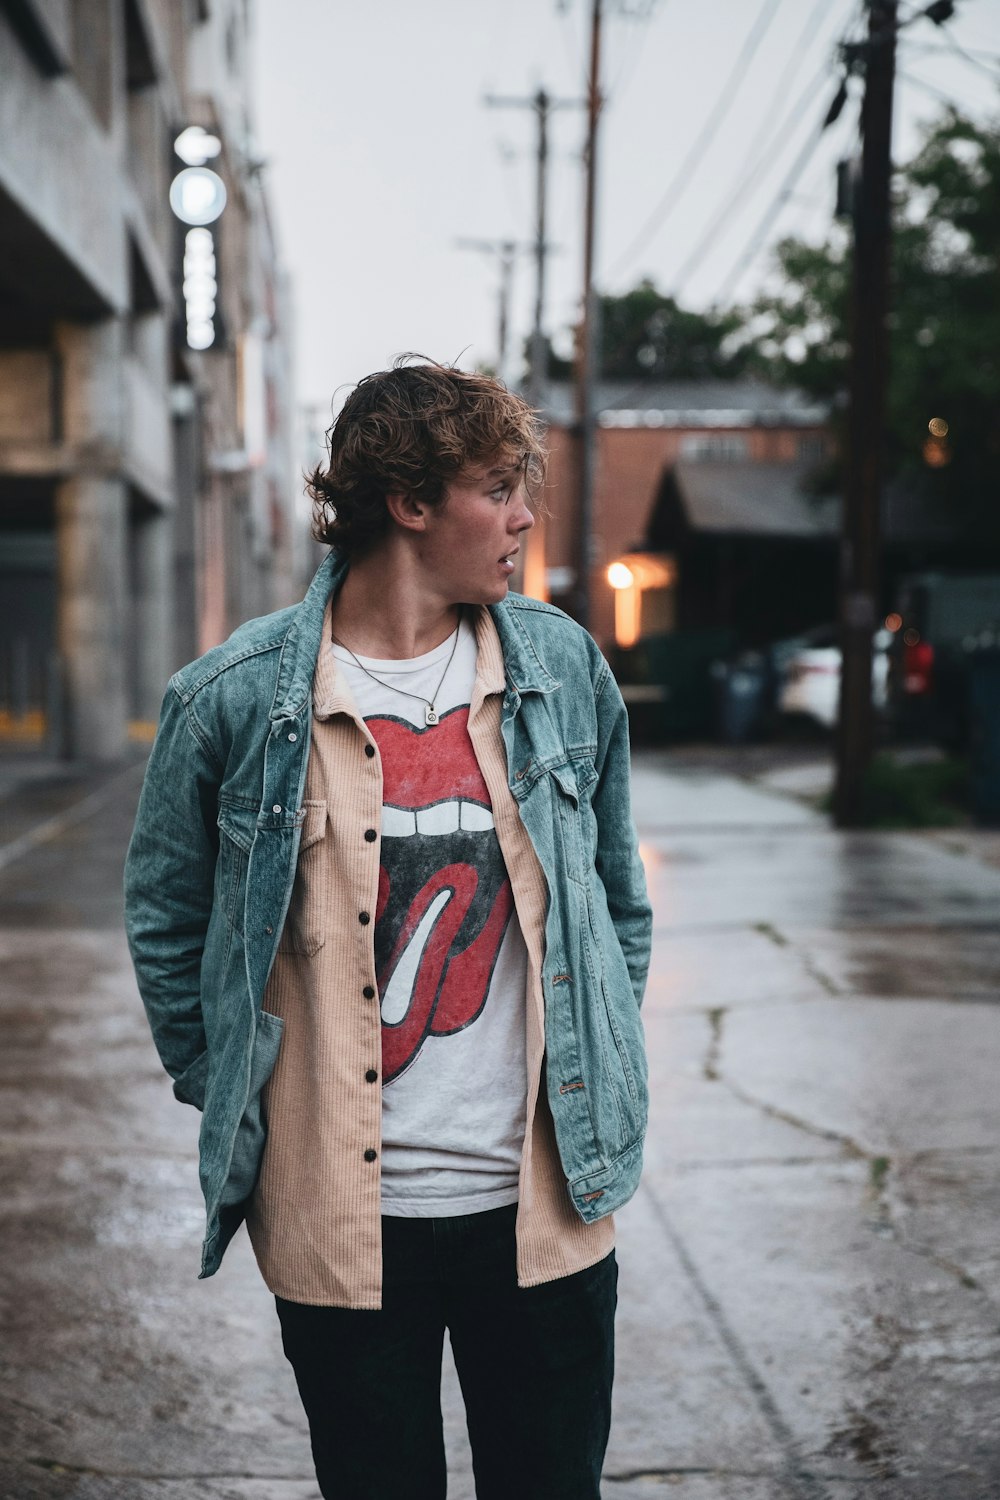 a young man standing on a wet sidewalk